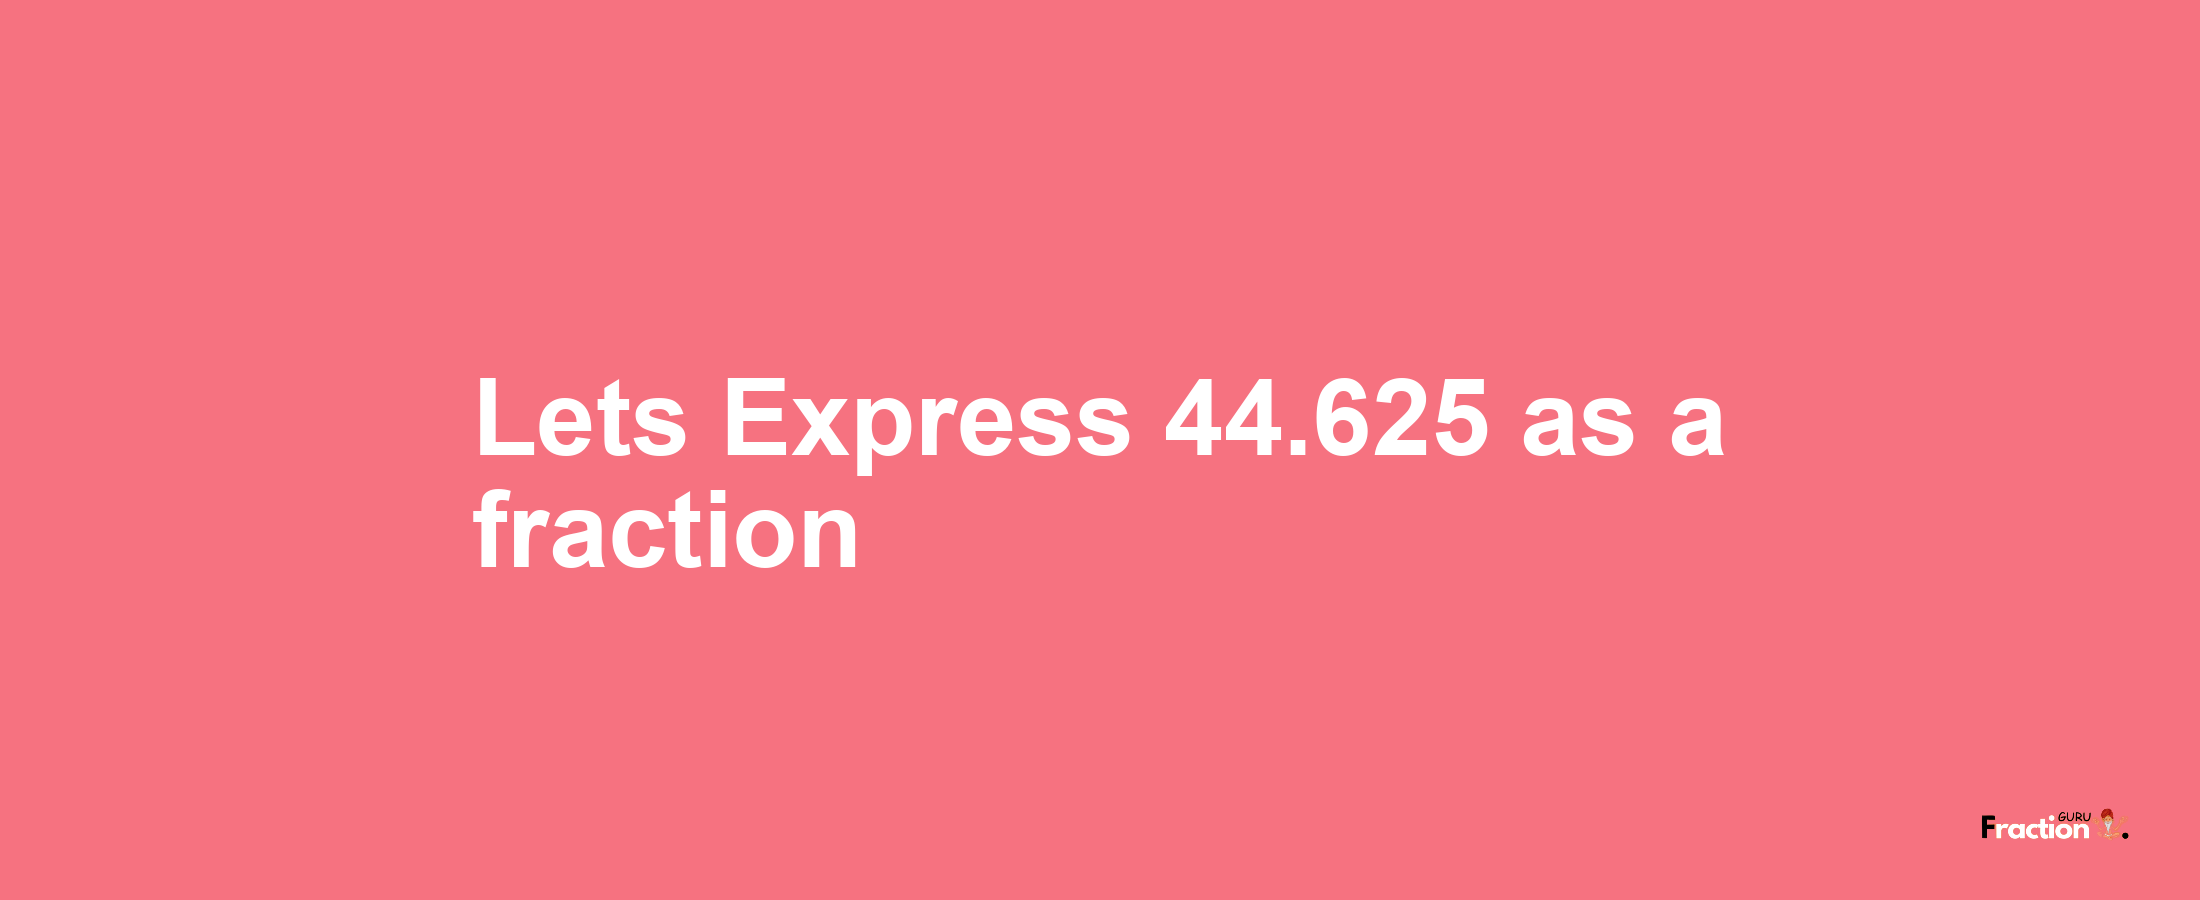 Lets Express 44.625 as afraction